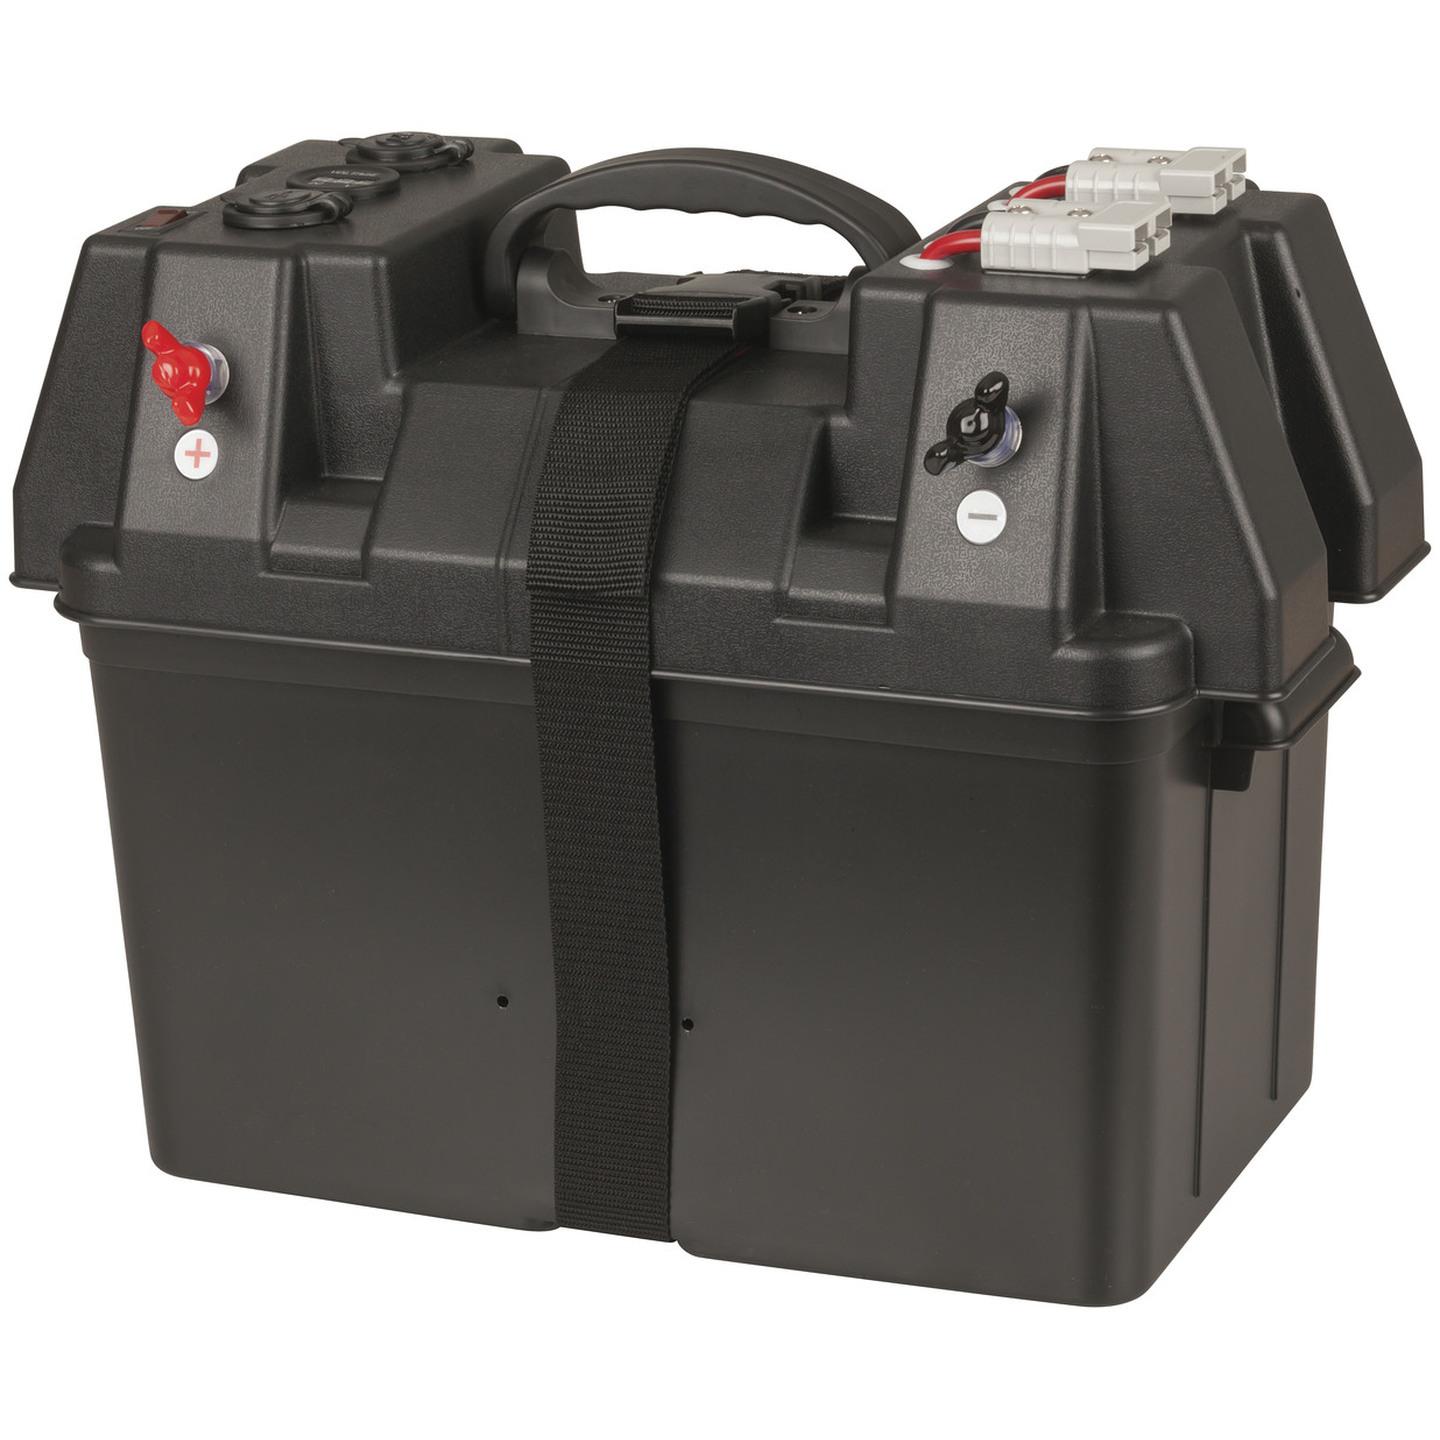 Powertech Battery Box with Power Accessories